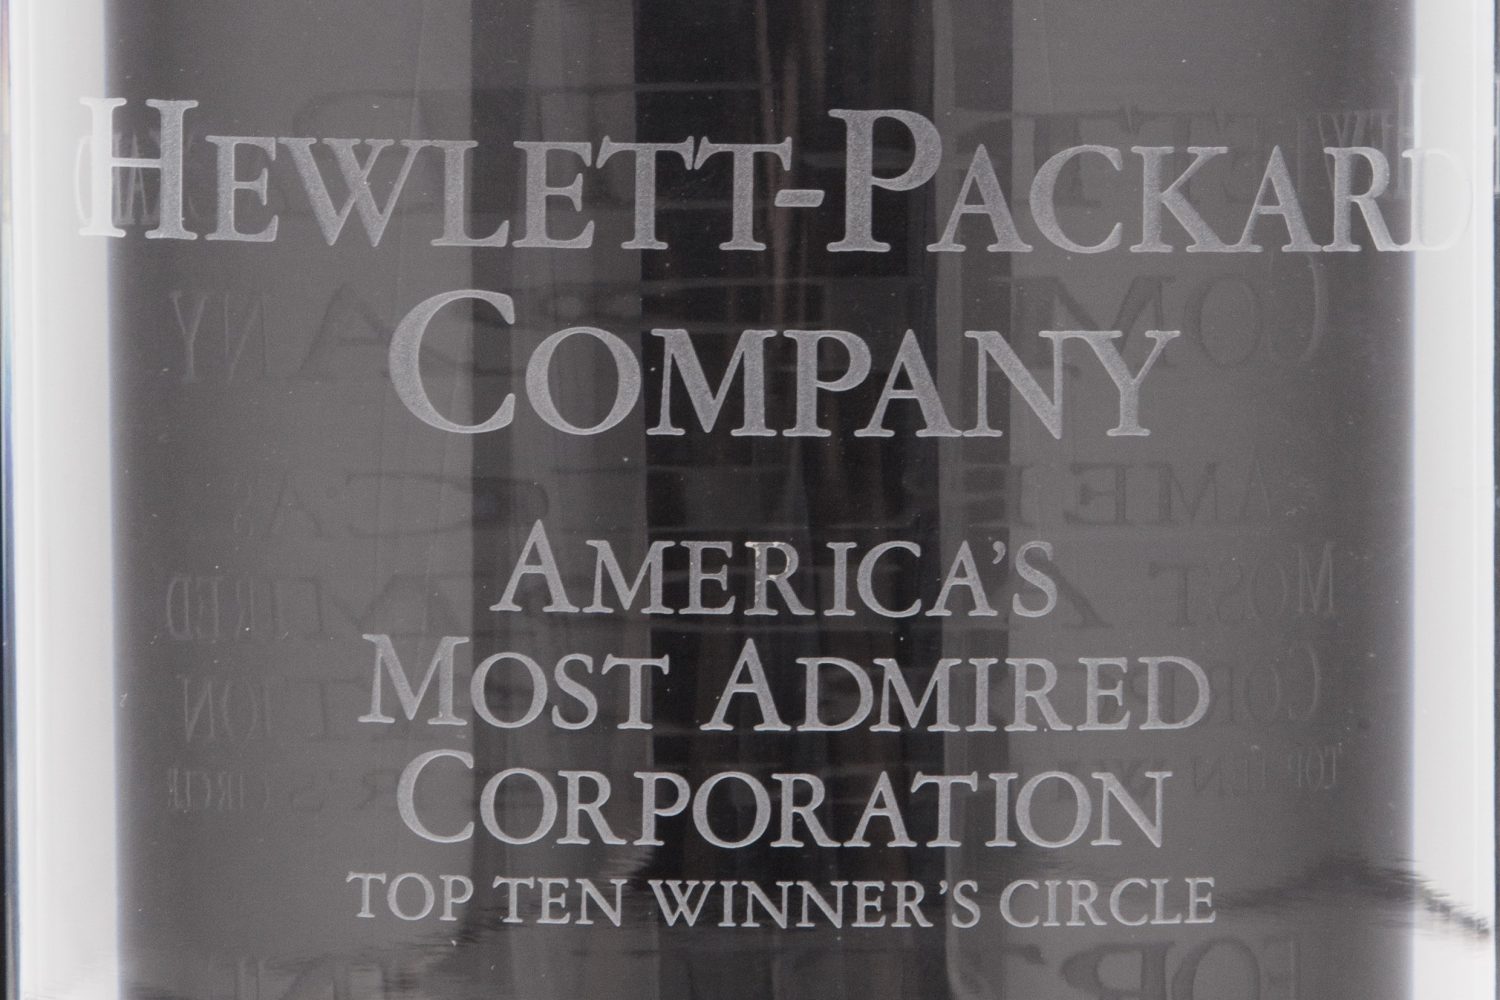 Hewlett-Packard's award from Fortune for America's Most Admired Corporation, Top Ten Winner's Circle.